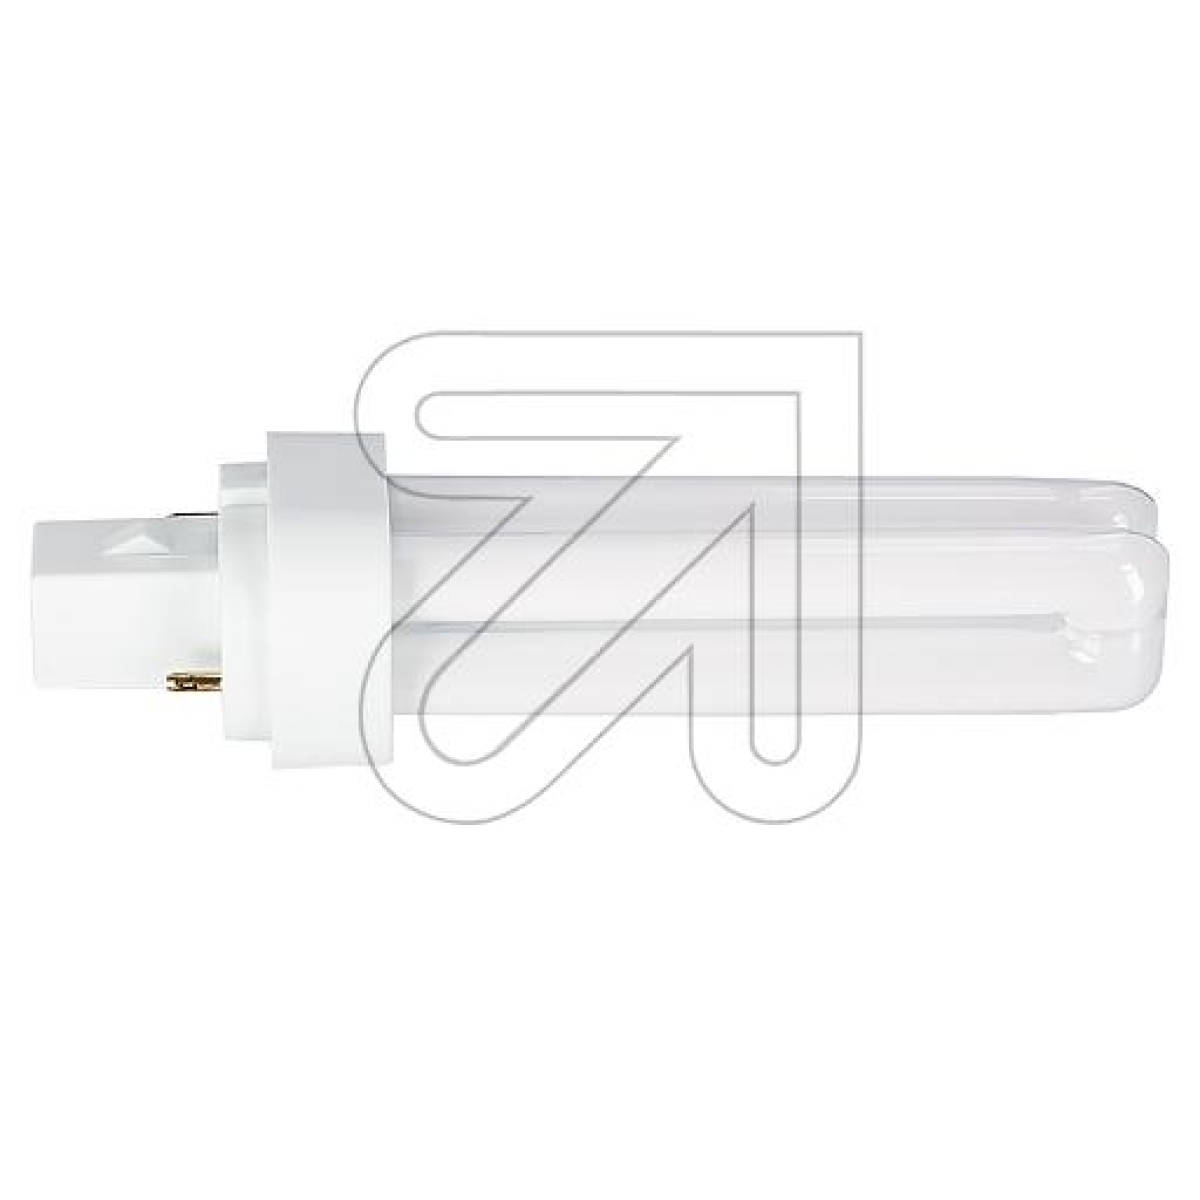 OSRAMDULUX D 13W/21840 010625 Dulux D with plug-in base G24d1/-2/-3 for conventional ballasts bright white 21-840 l/mm baseArticle-No: 525615L